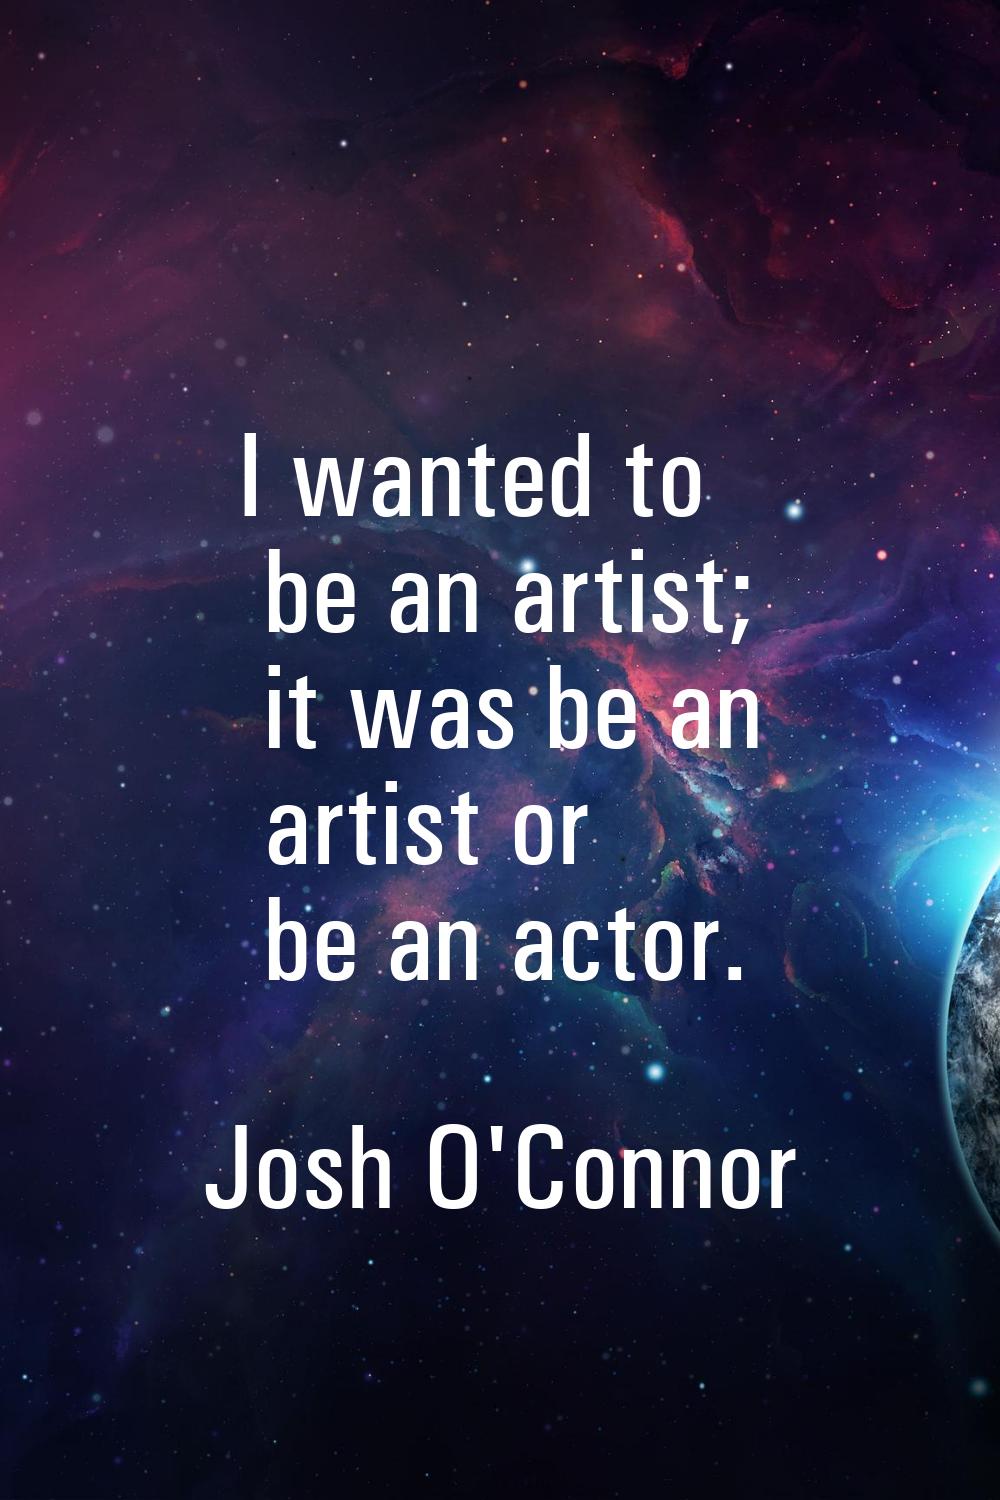 I wanted to be an artist; it was be an artist or be an actor.